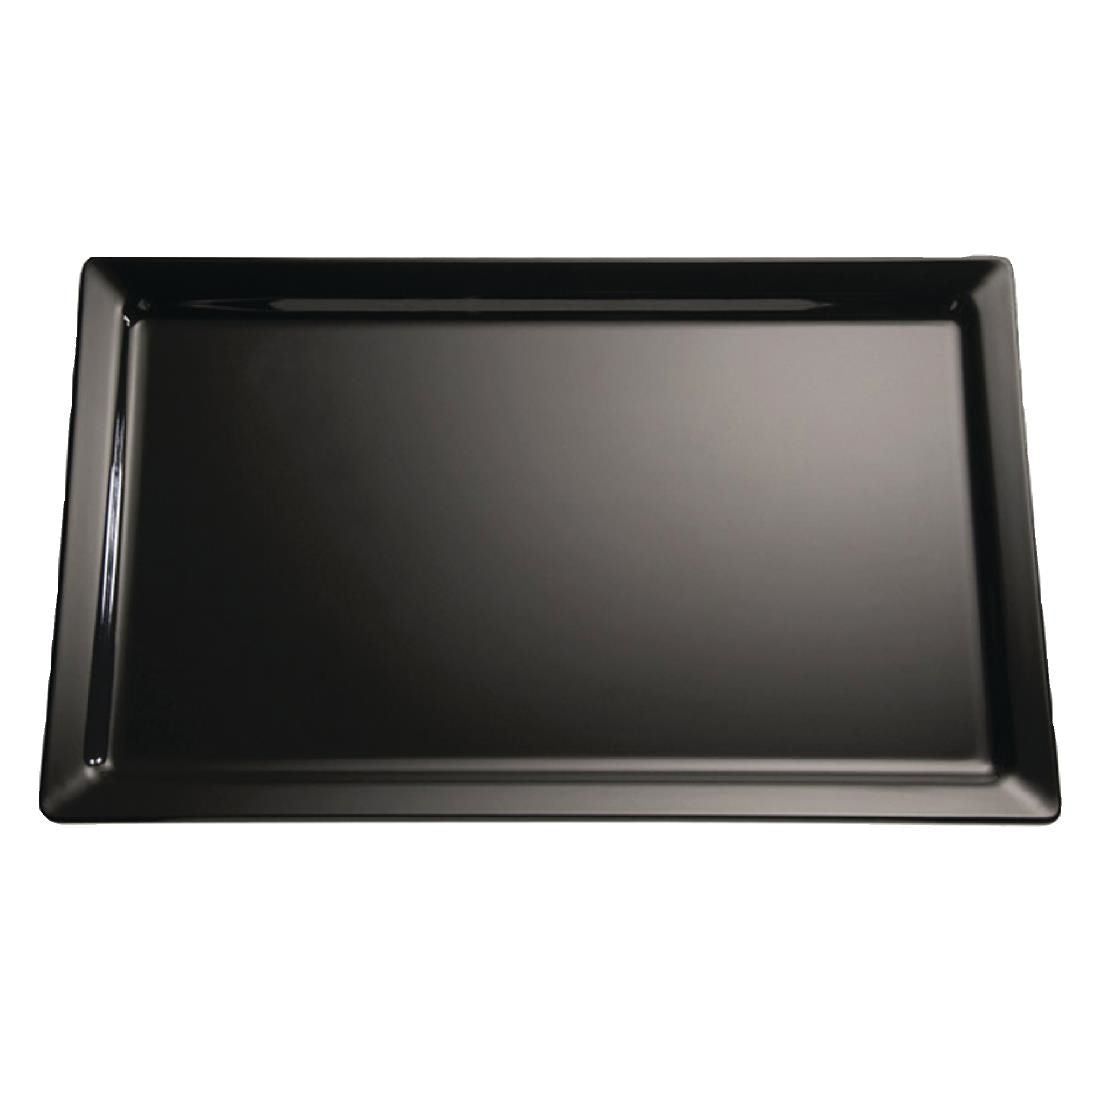 GF121 APS Pure Melamine Tray Black GN 1/1 JD Catering Equipment Solutions Ltd